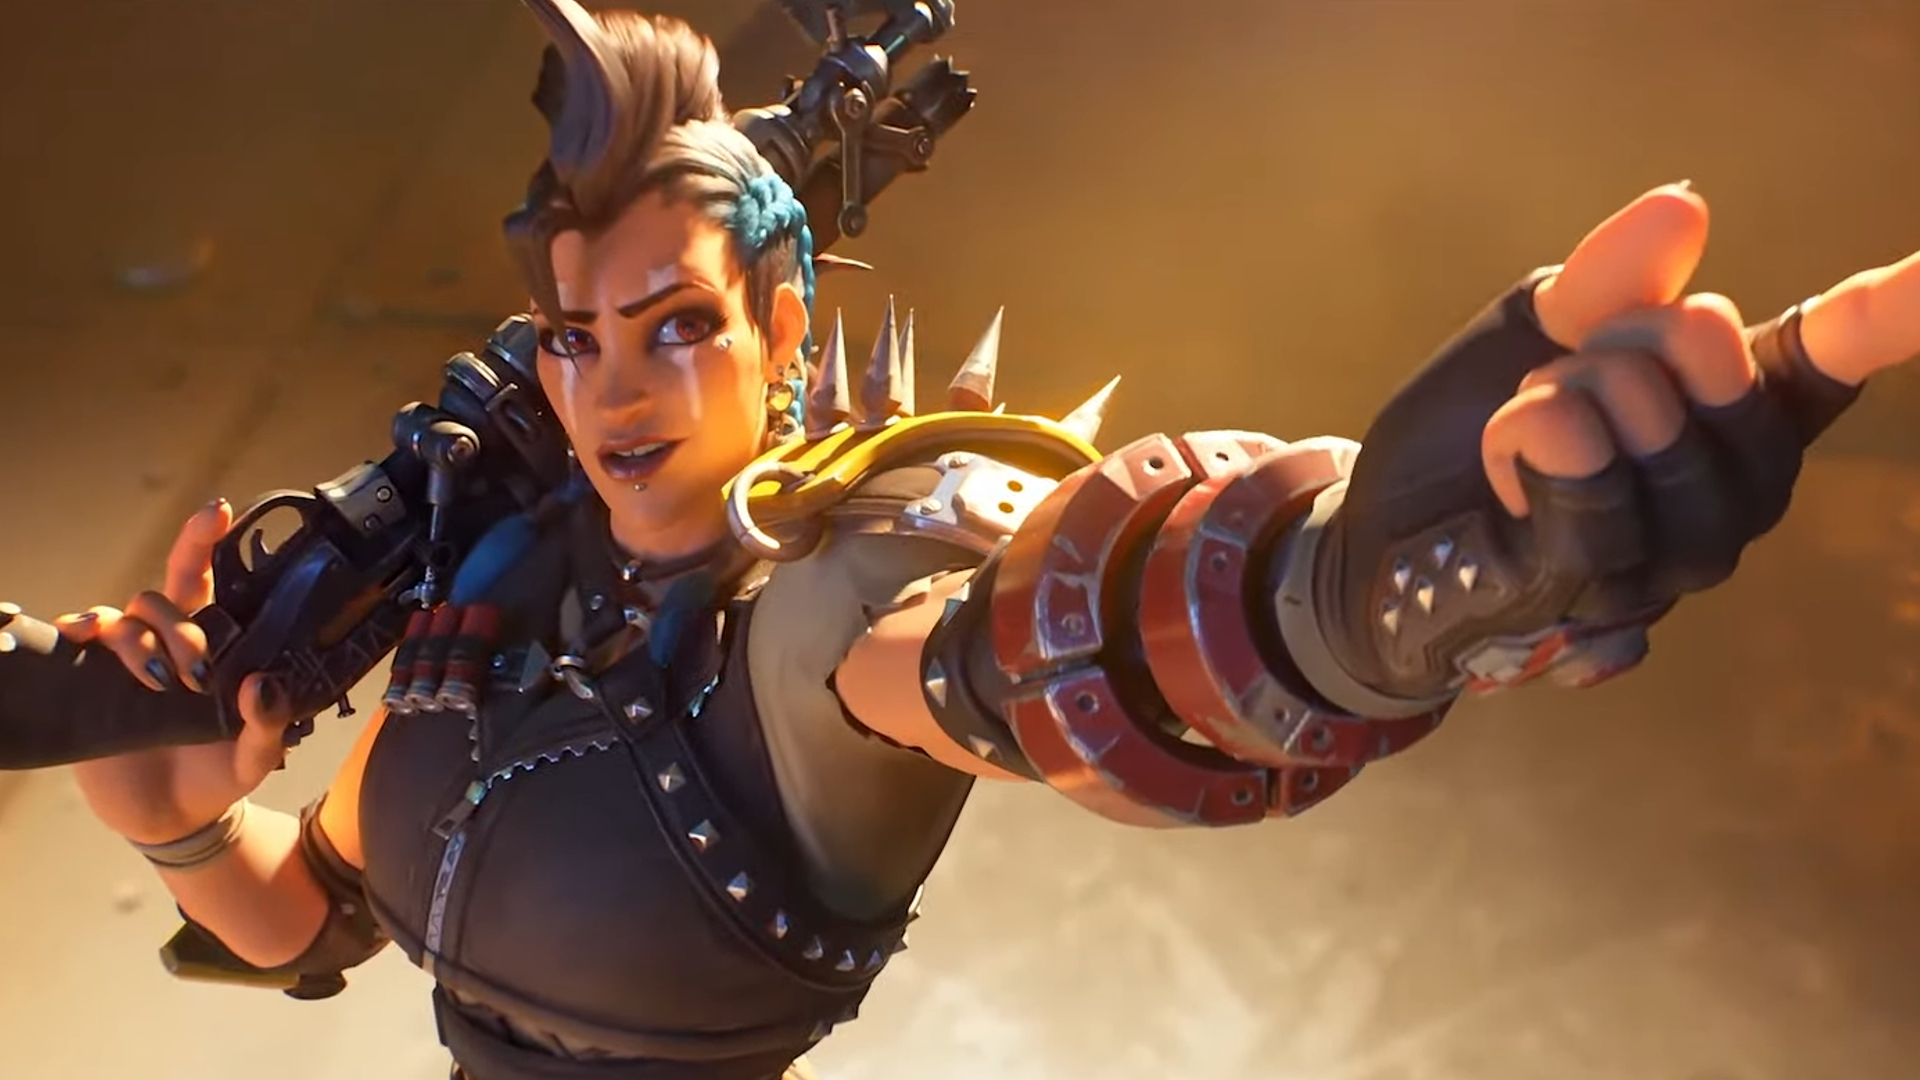  Overwatch 2 is releasing free-to-play this October 